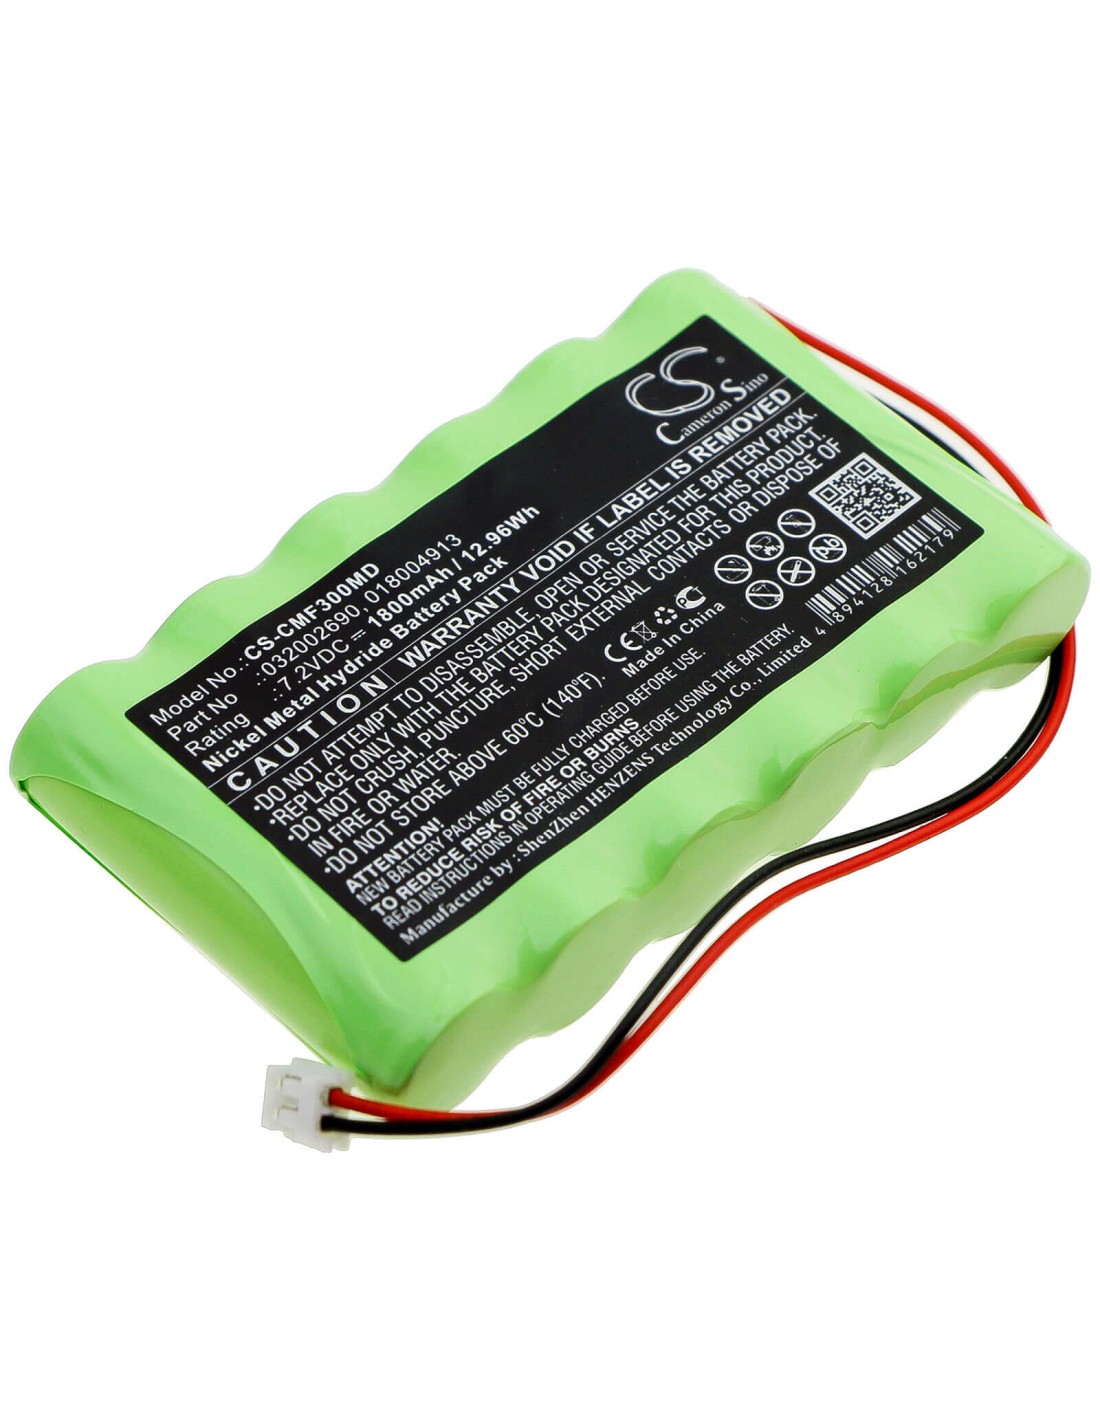 Battery for Compex, Fitness, Fitness, Tens 7.2V, 1800mAh - 12.96Wh